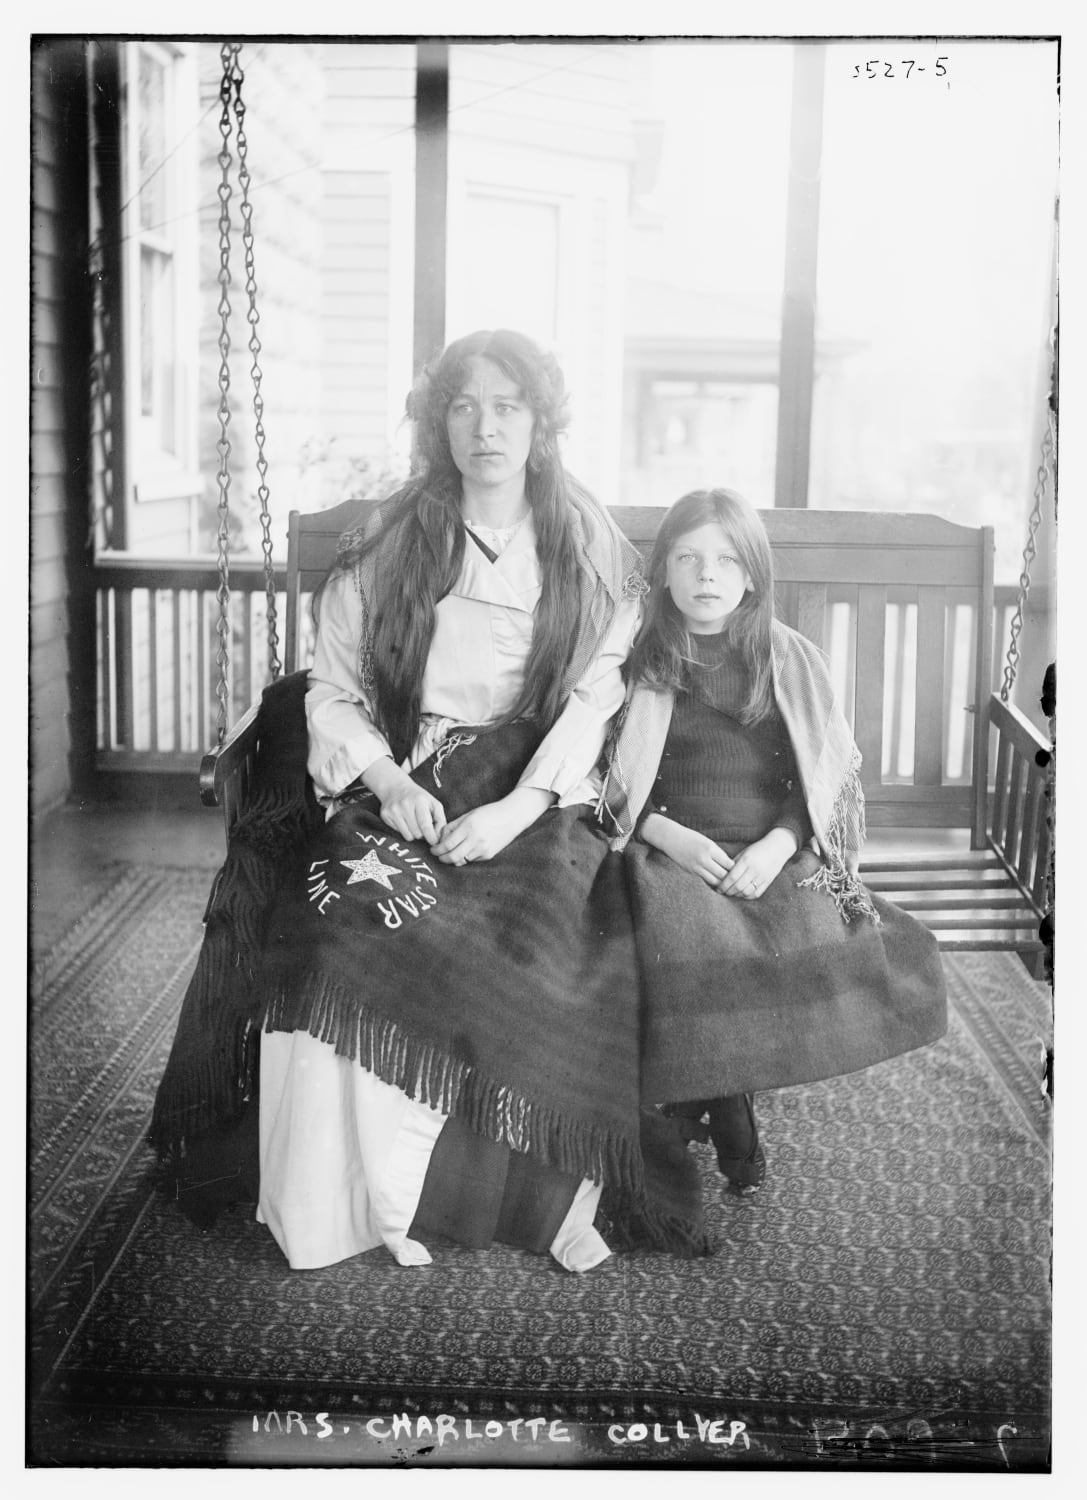 Charlotte Collyer and her daughter Marjorie, survivors of the sinking of the RMS Titanic, 1912